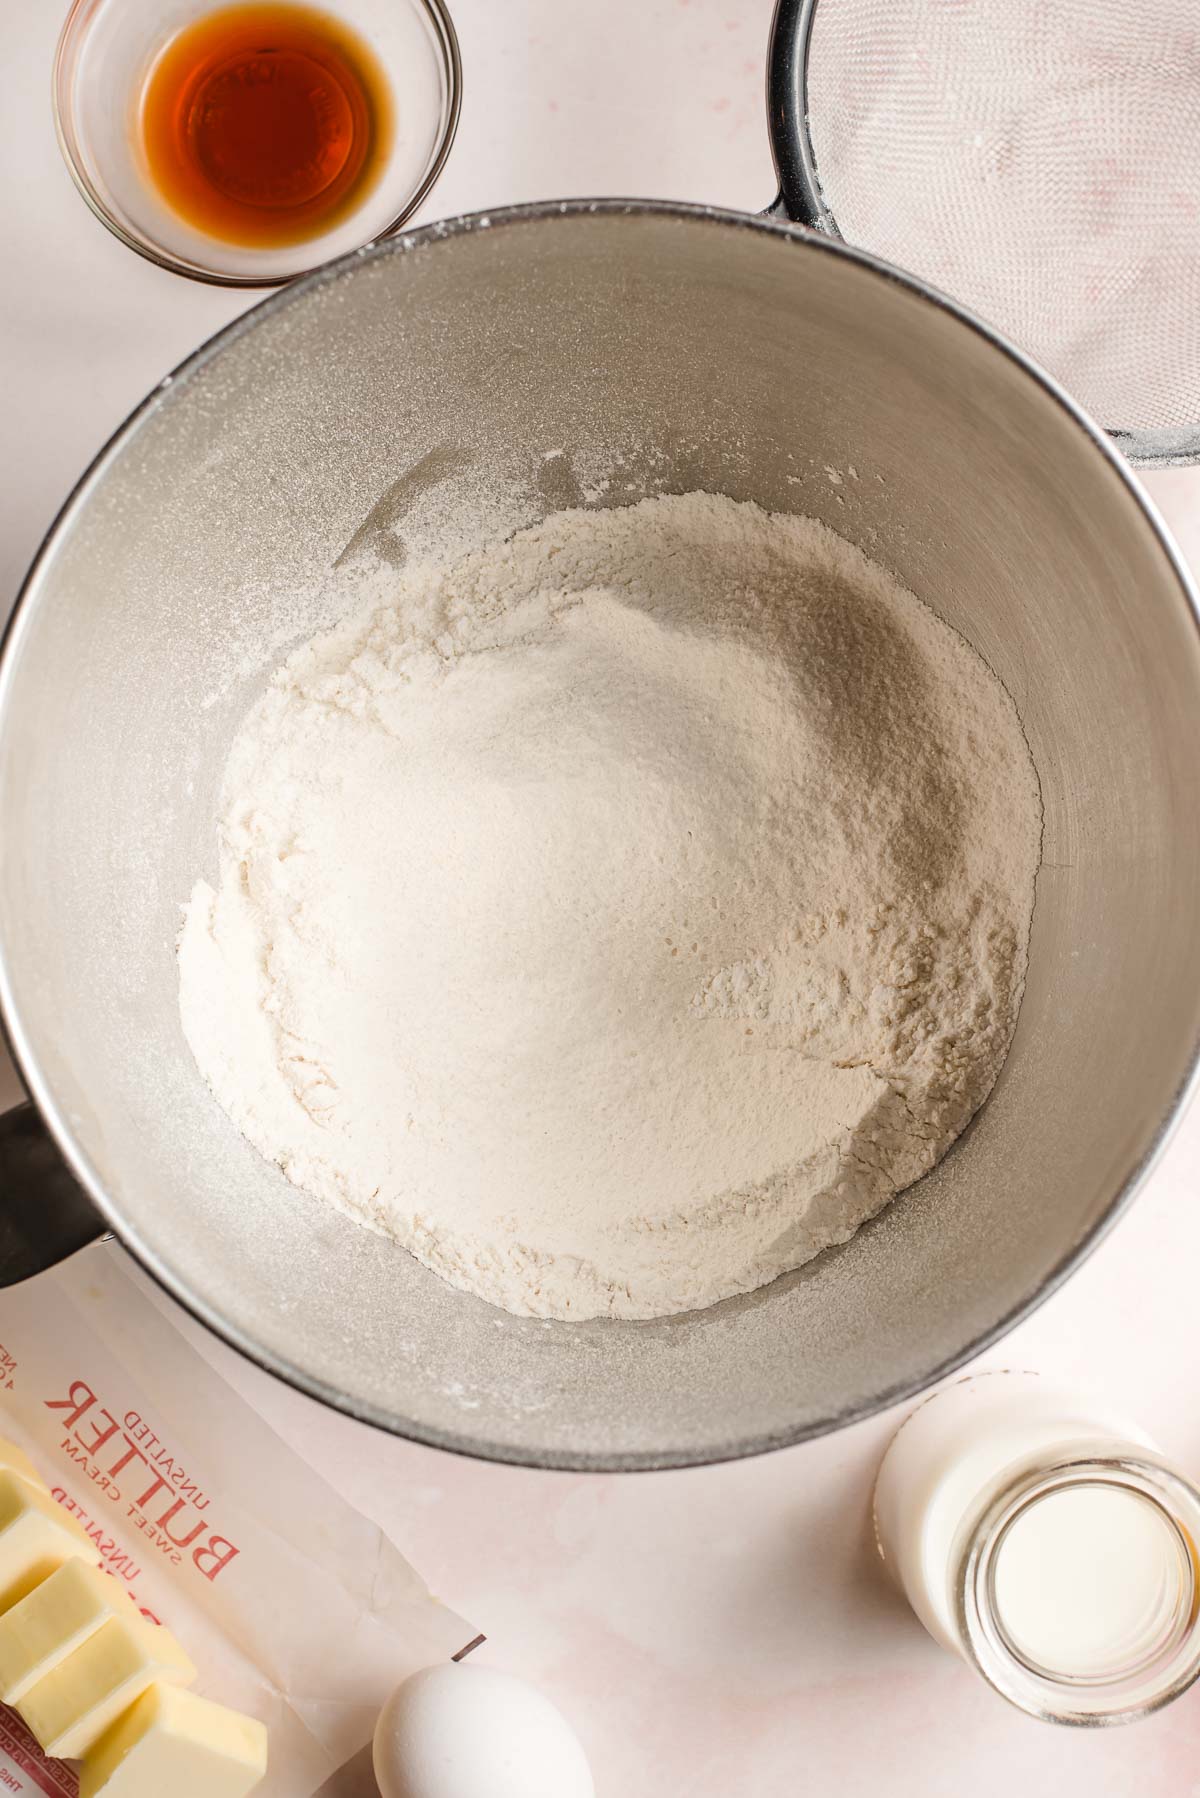 Sifted flour, baking powder, and salt in the bowl of an elxtric mixer.